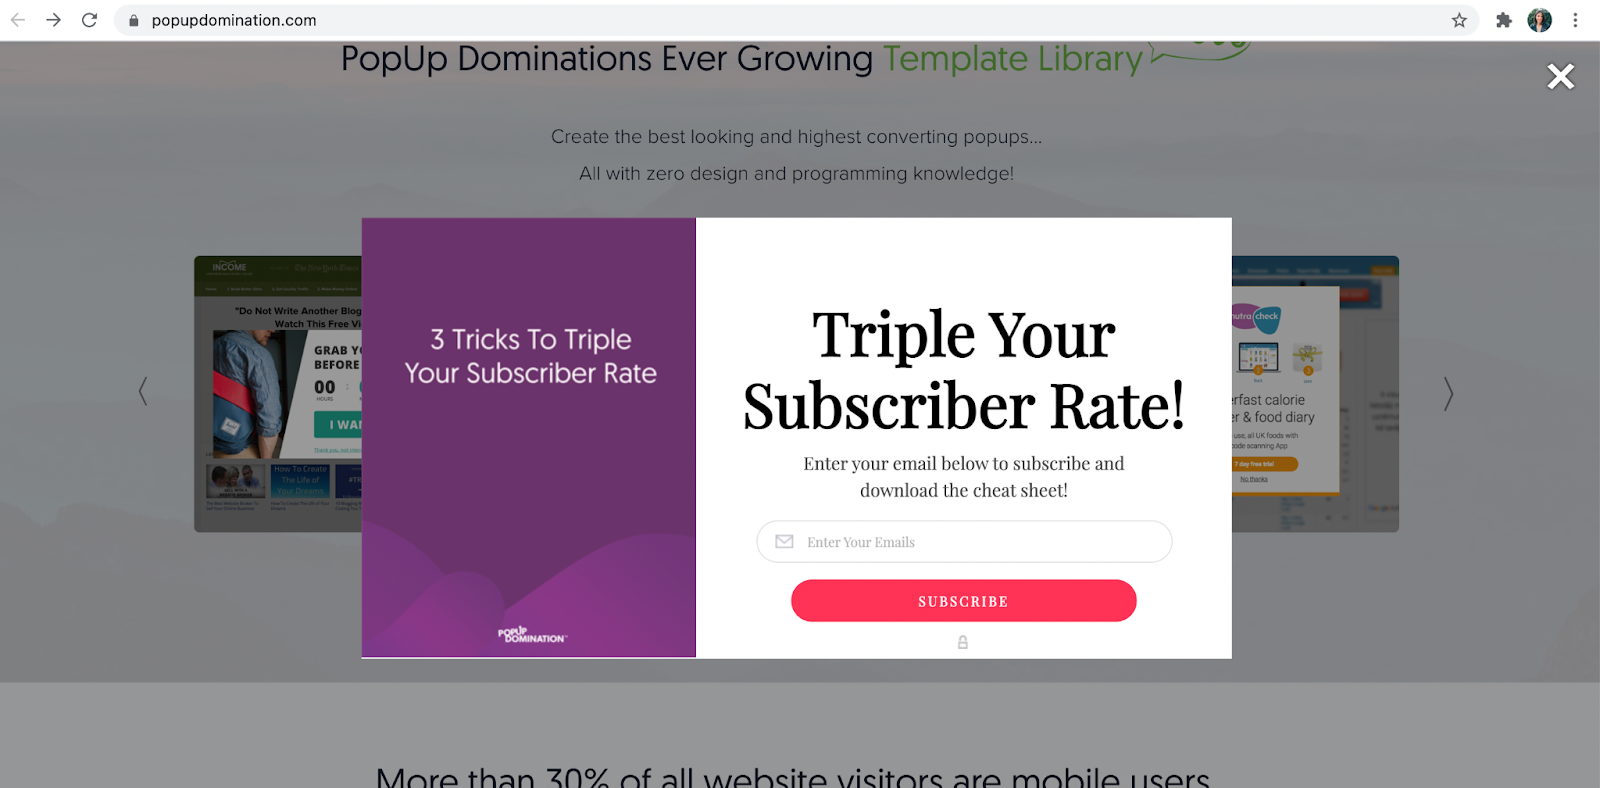 Popup Domination’s email CTA